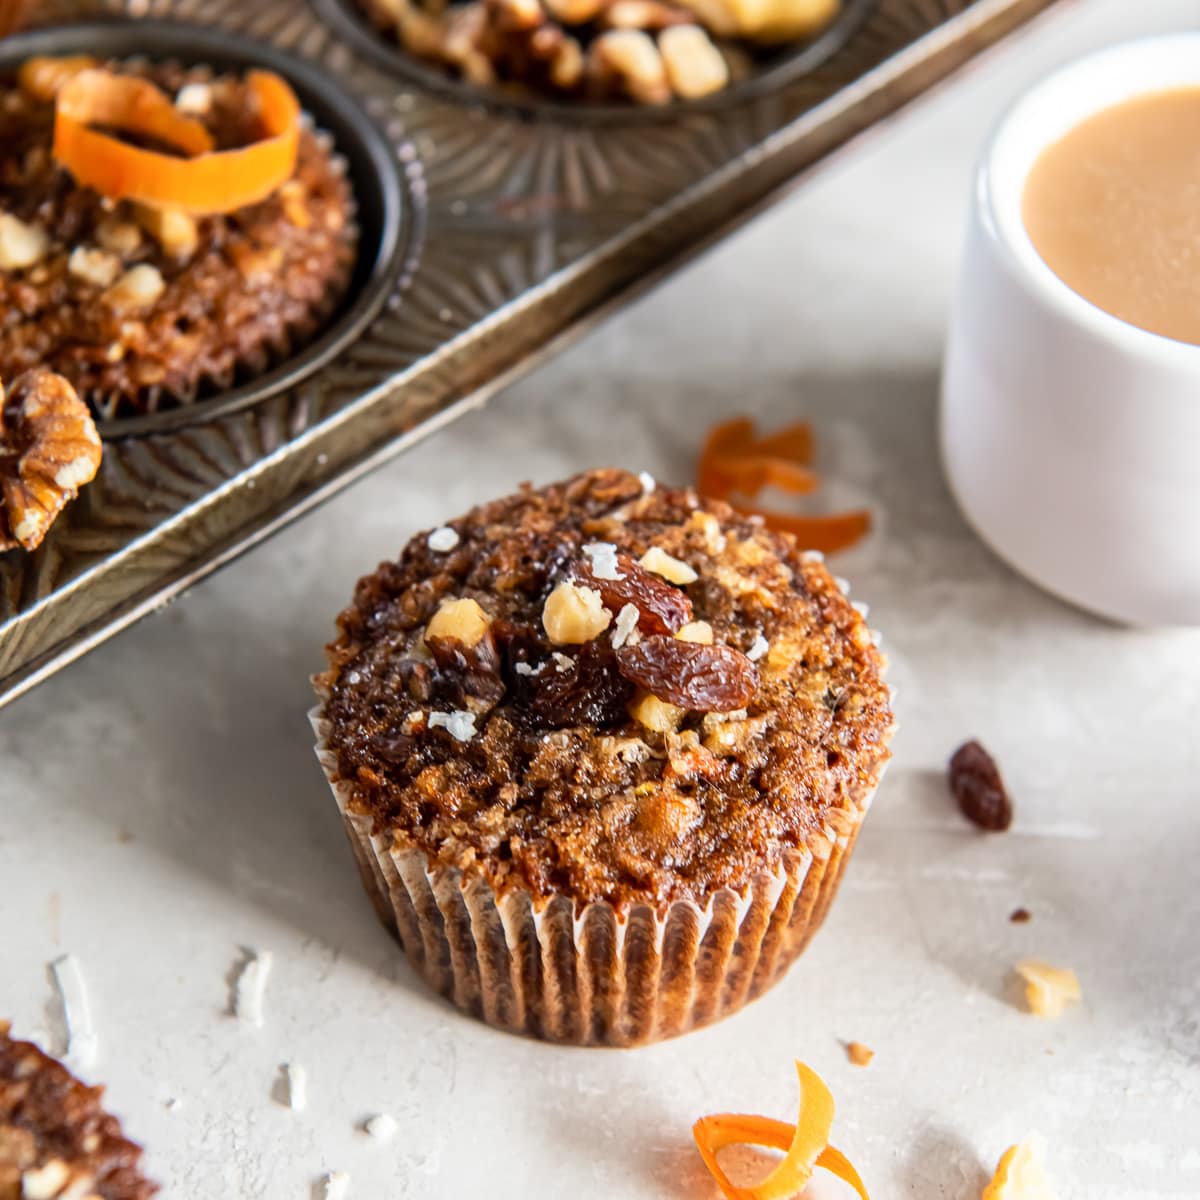 morning glory muffin with carrots, raisins and coconut.